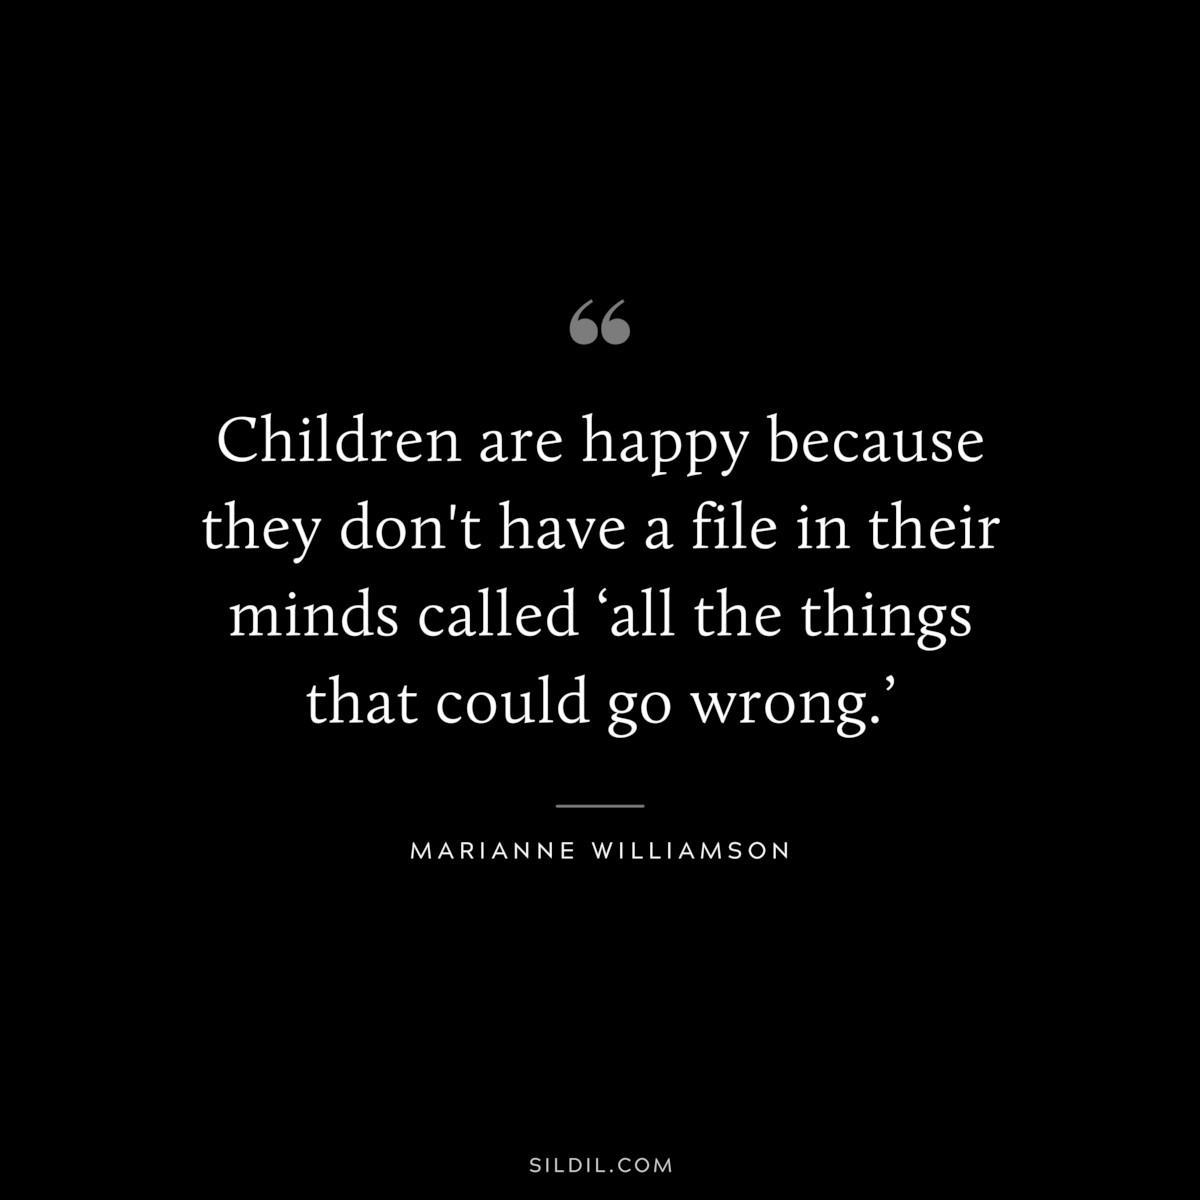 Children are happy because they don't have a file in their minds called ‘all the things that could go wrong.’ ― Marianne Williamson